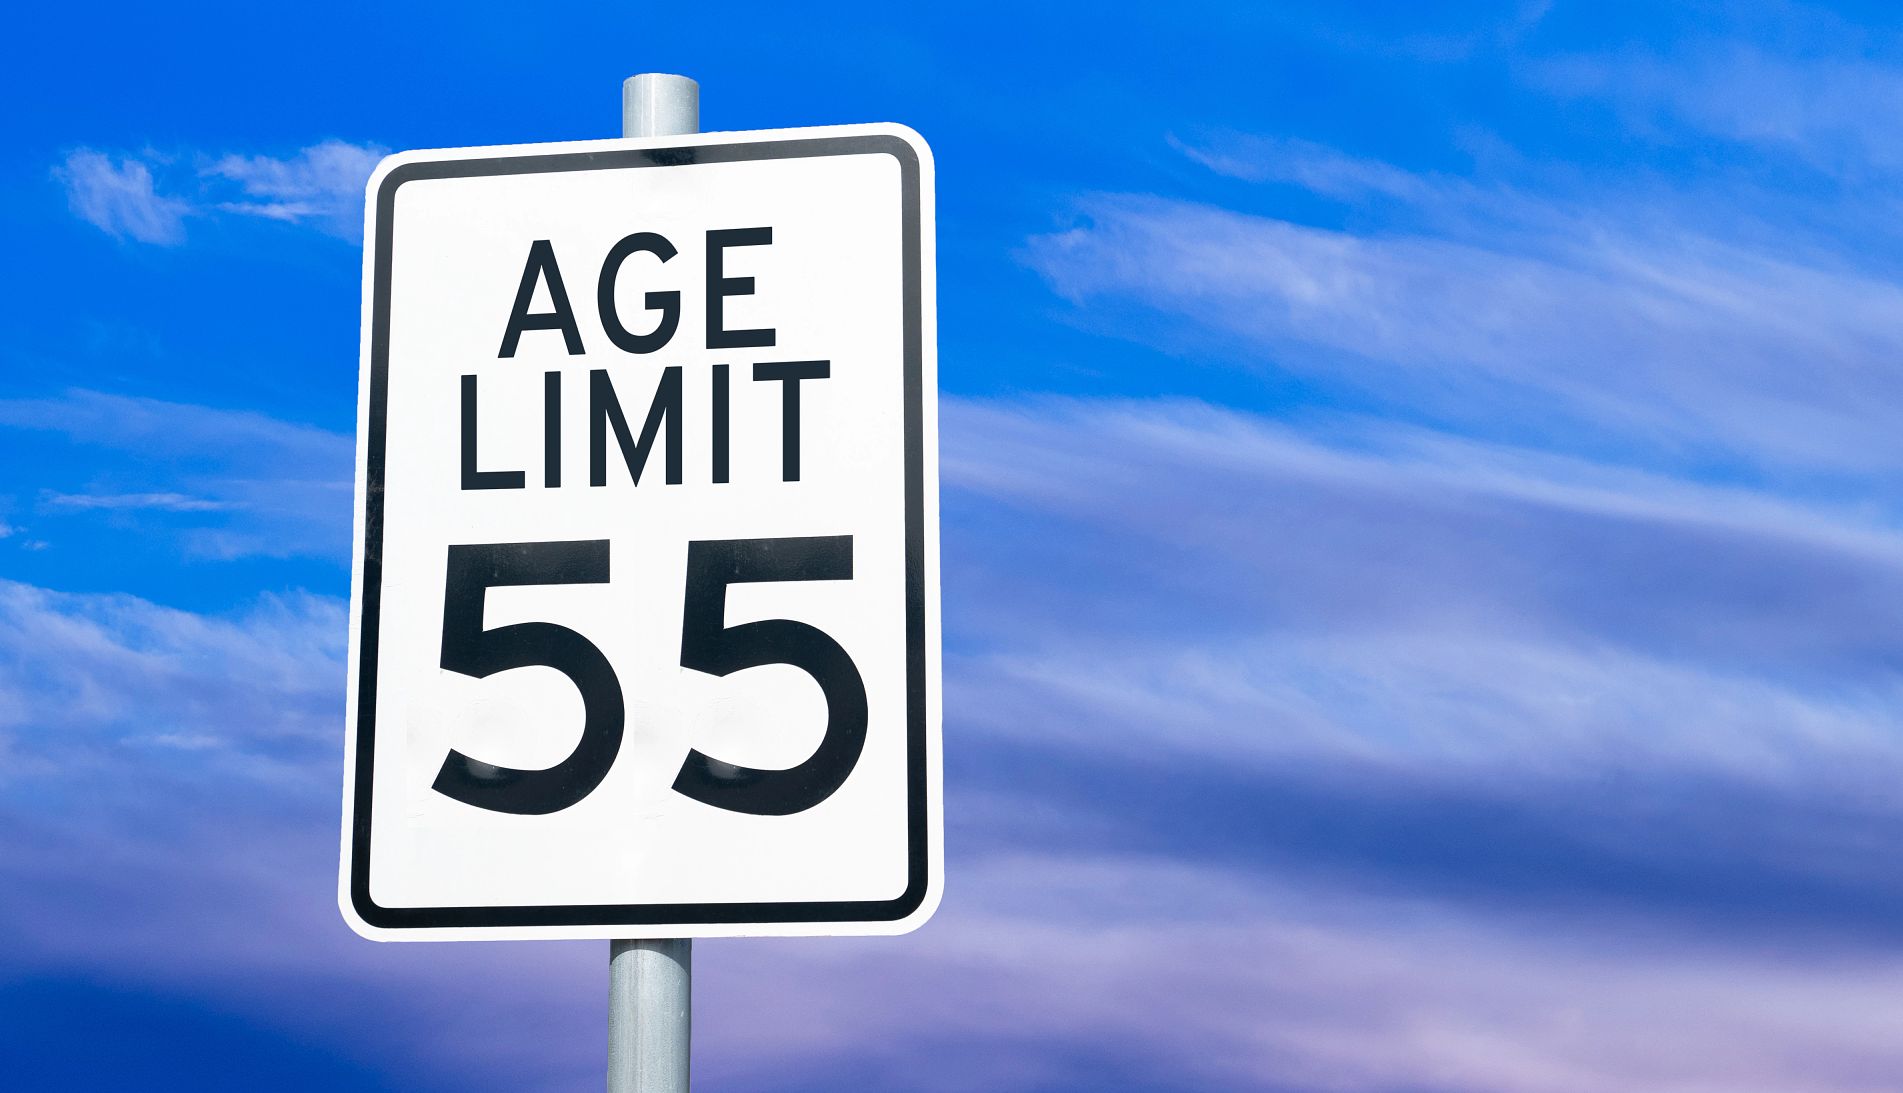 a speed sign with age limit 55 on it